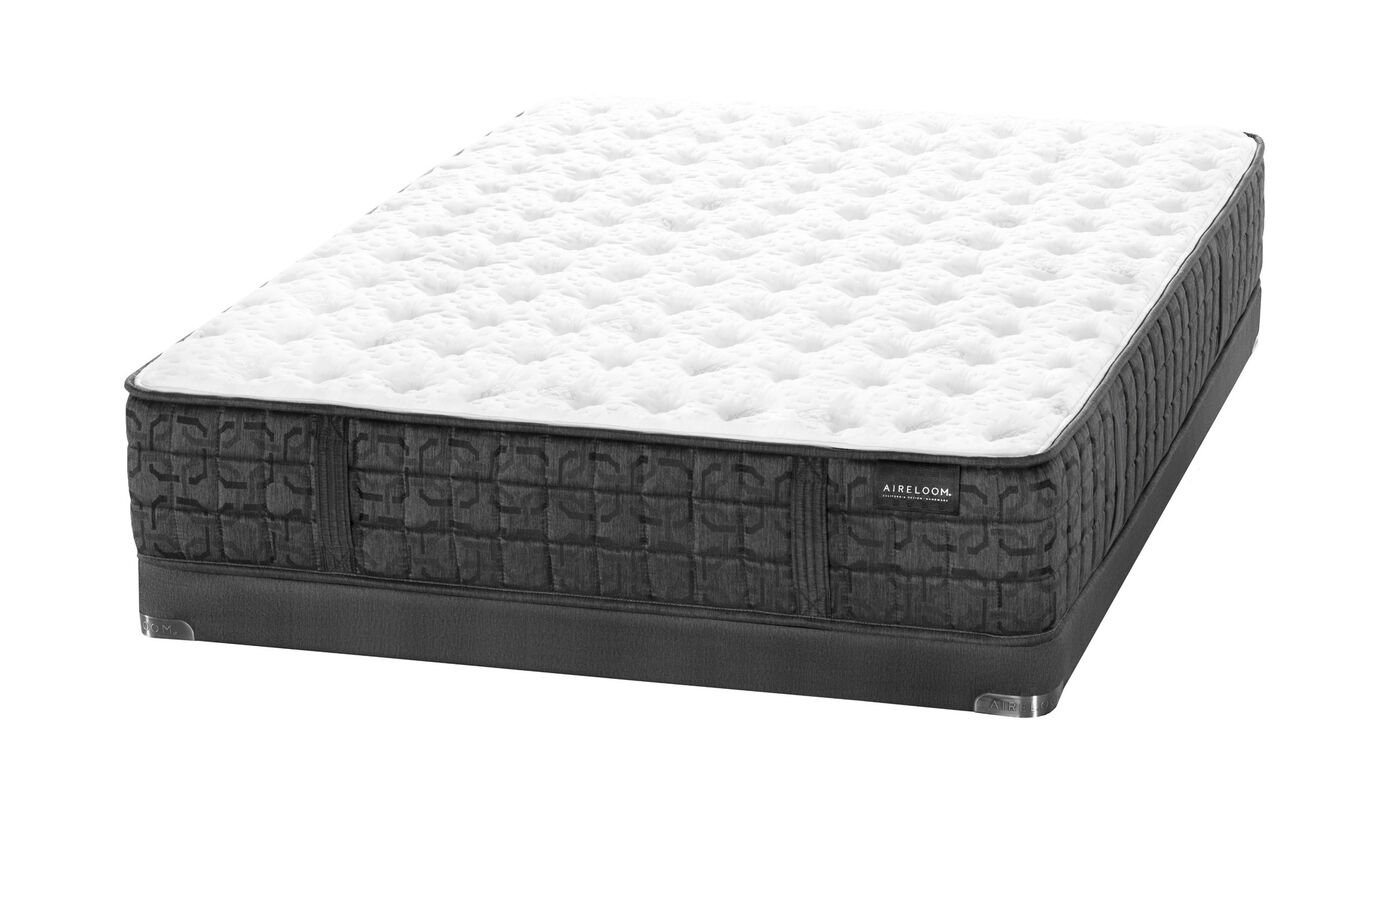 Aireloom Pacific Bay Orion Plush Mattress 12.5" image number 4